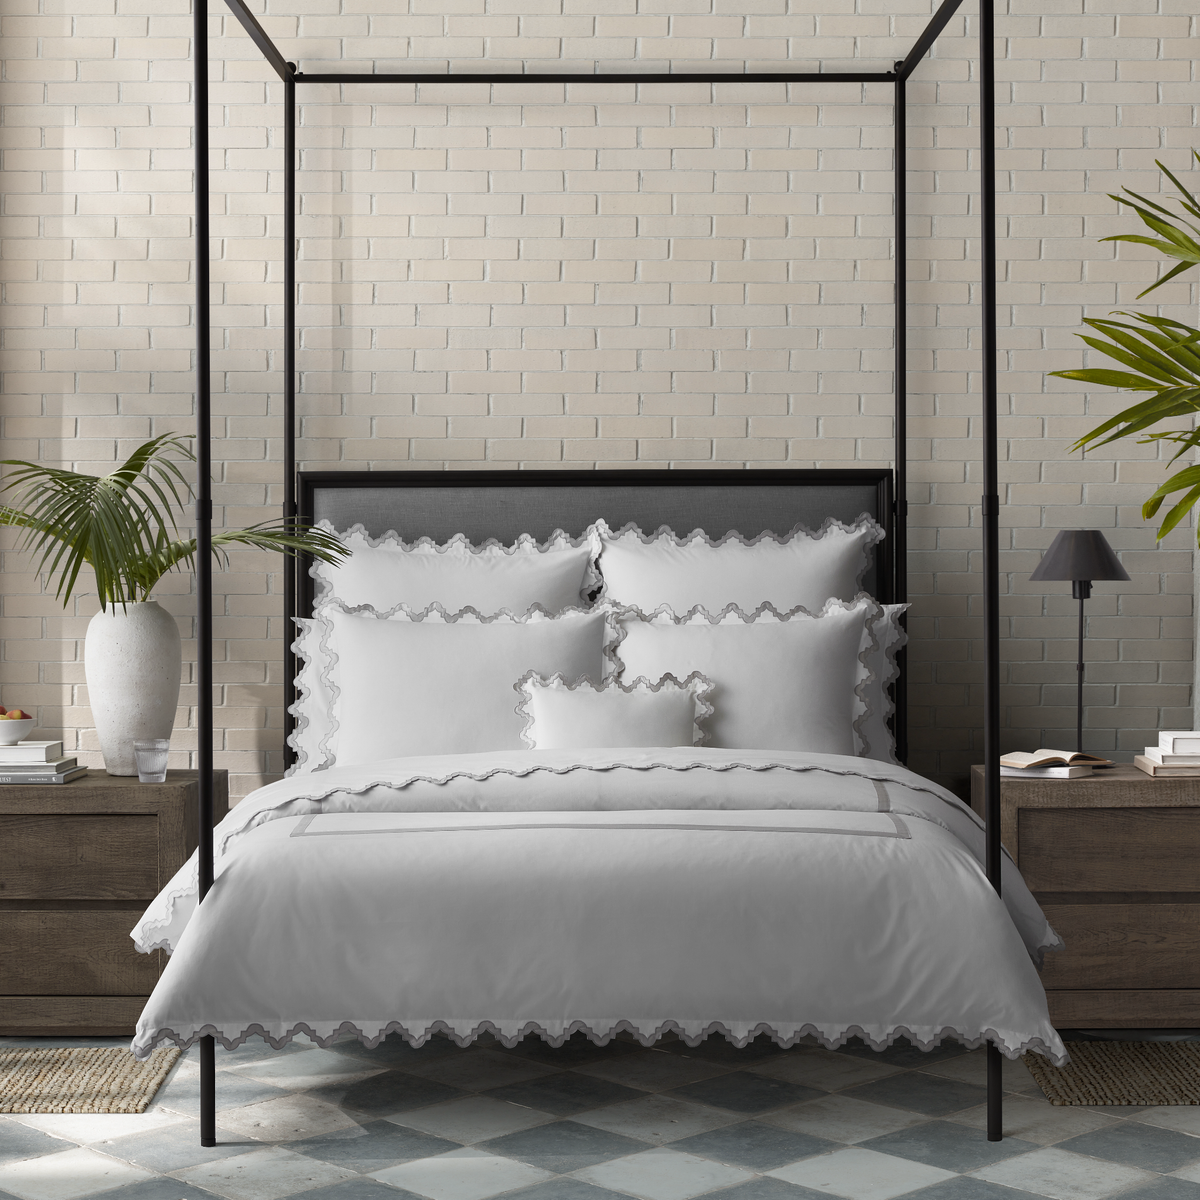 Lifestyle Image of a Full Bed Dressed in Matouk Aziza Bedding in Silver Color